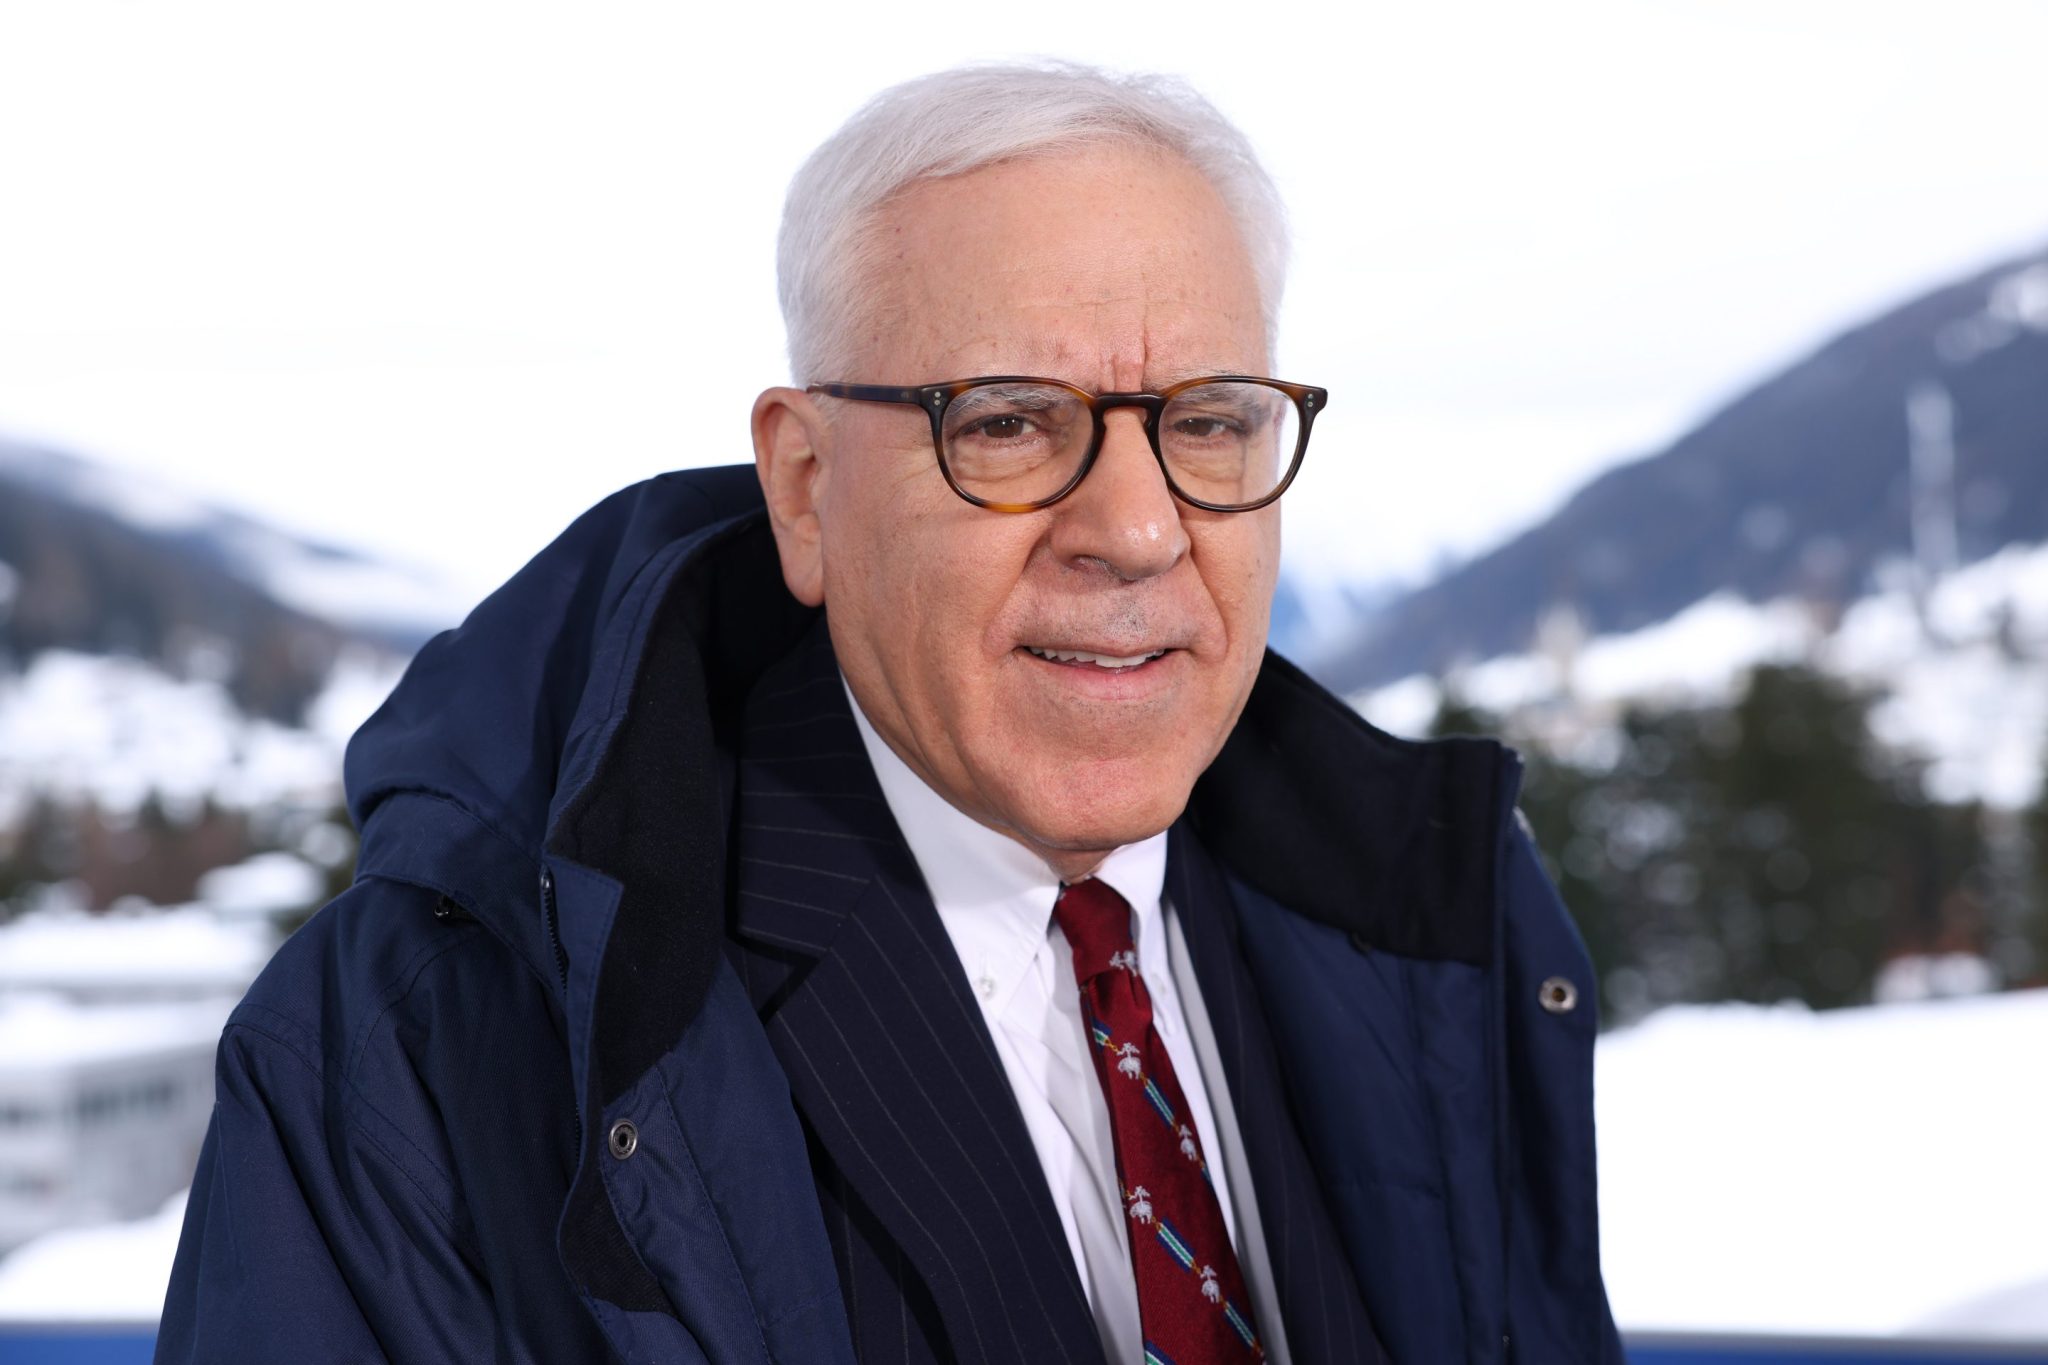 Group led by Carlyle’s David Rubenstein to buy Orioles for more than $1.7 billion